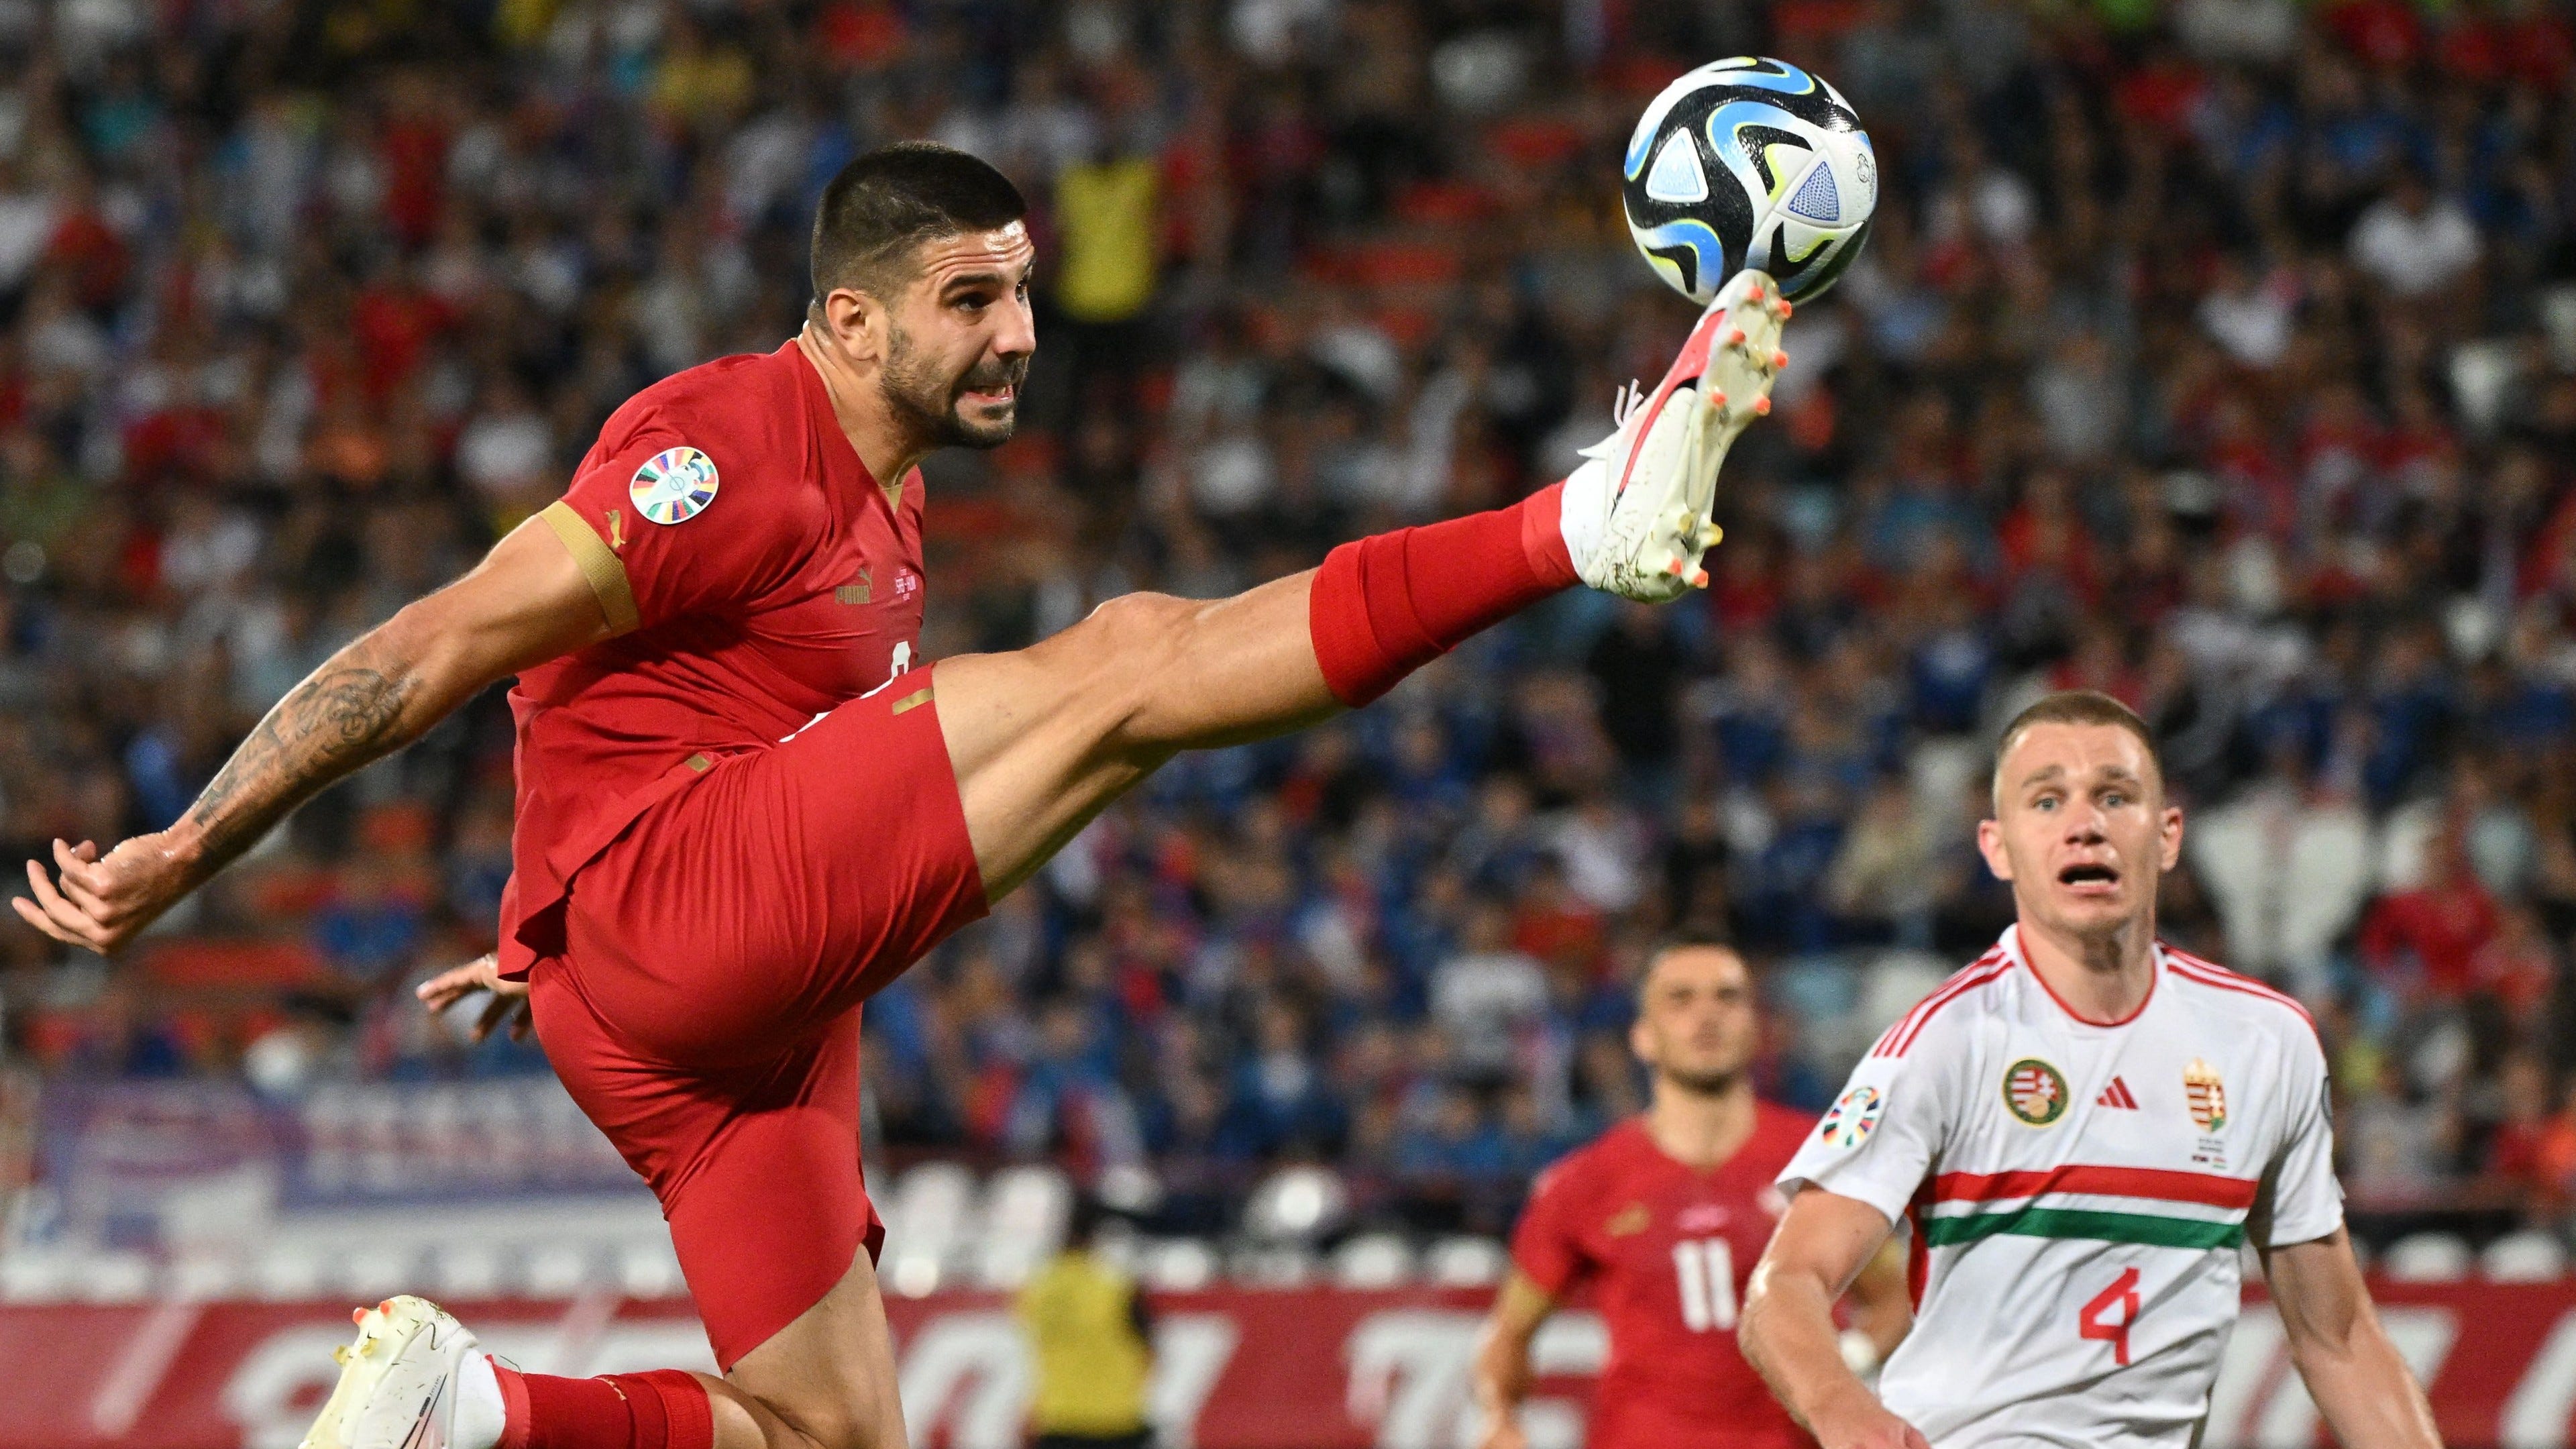 Serbia vs Montenegro Live stream, TV channel, kick-off time and where to watch Goal UK